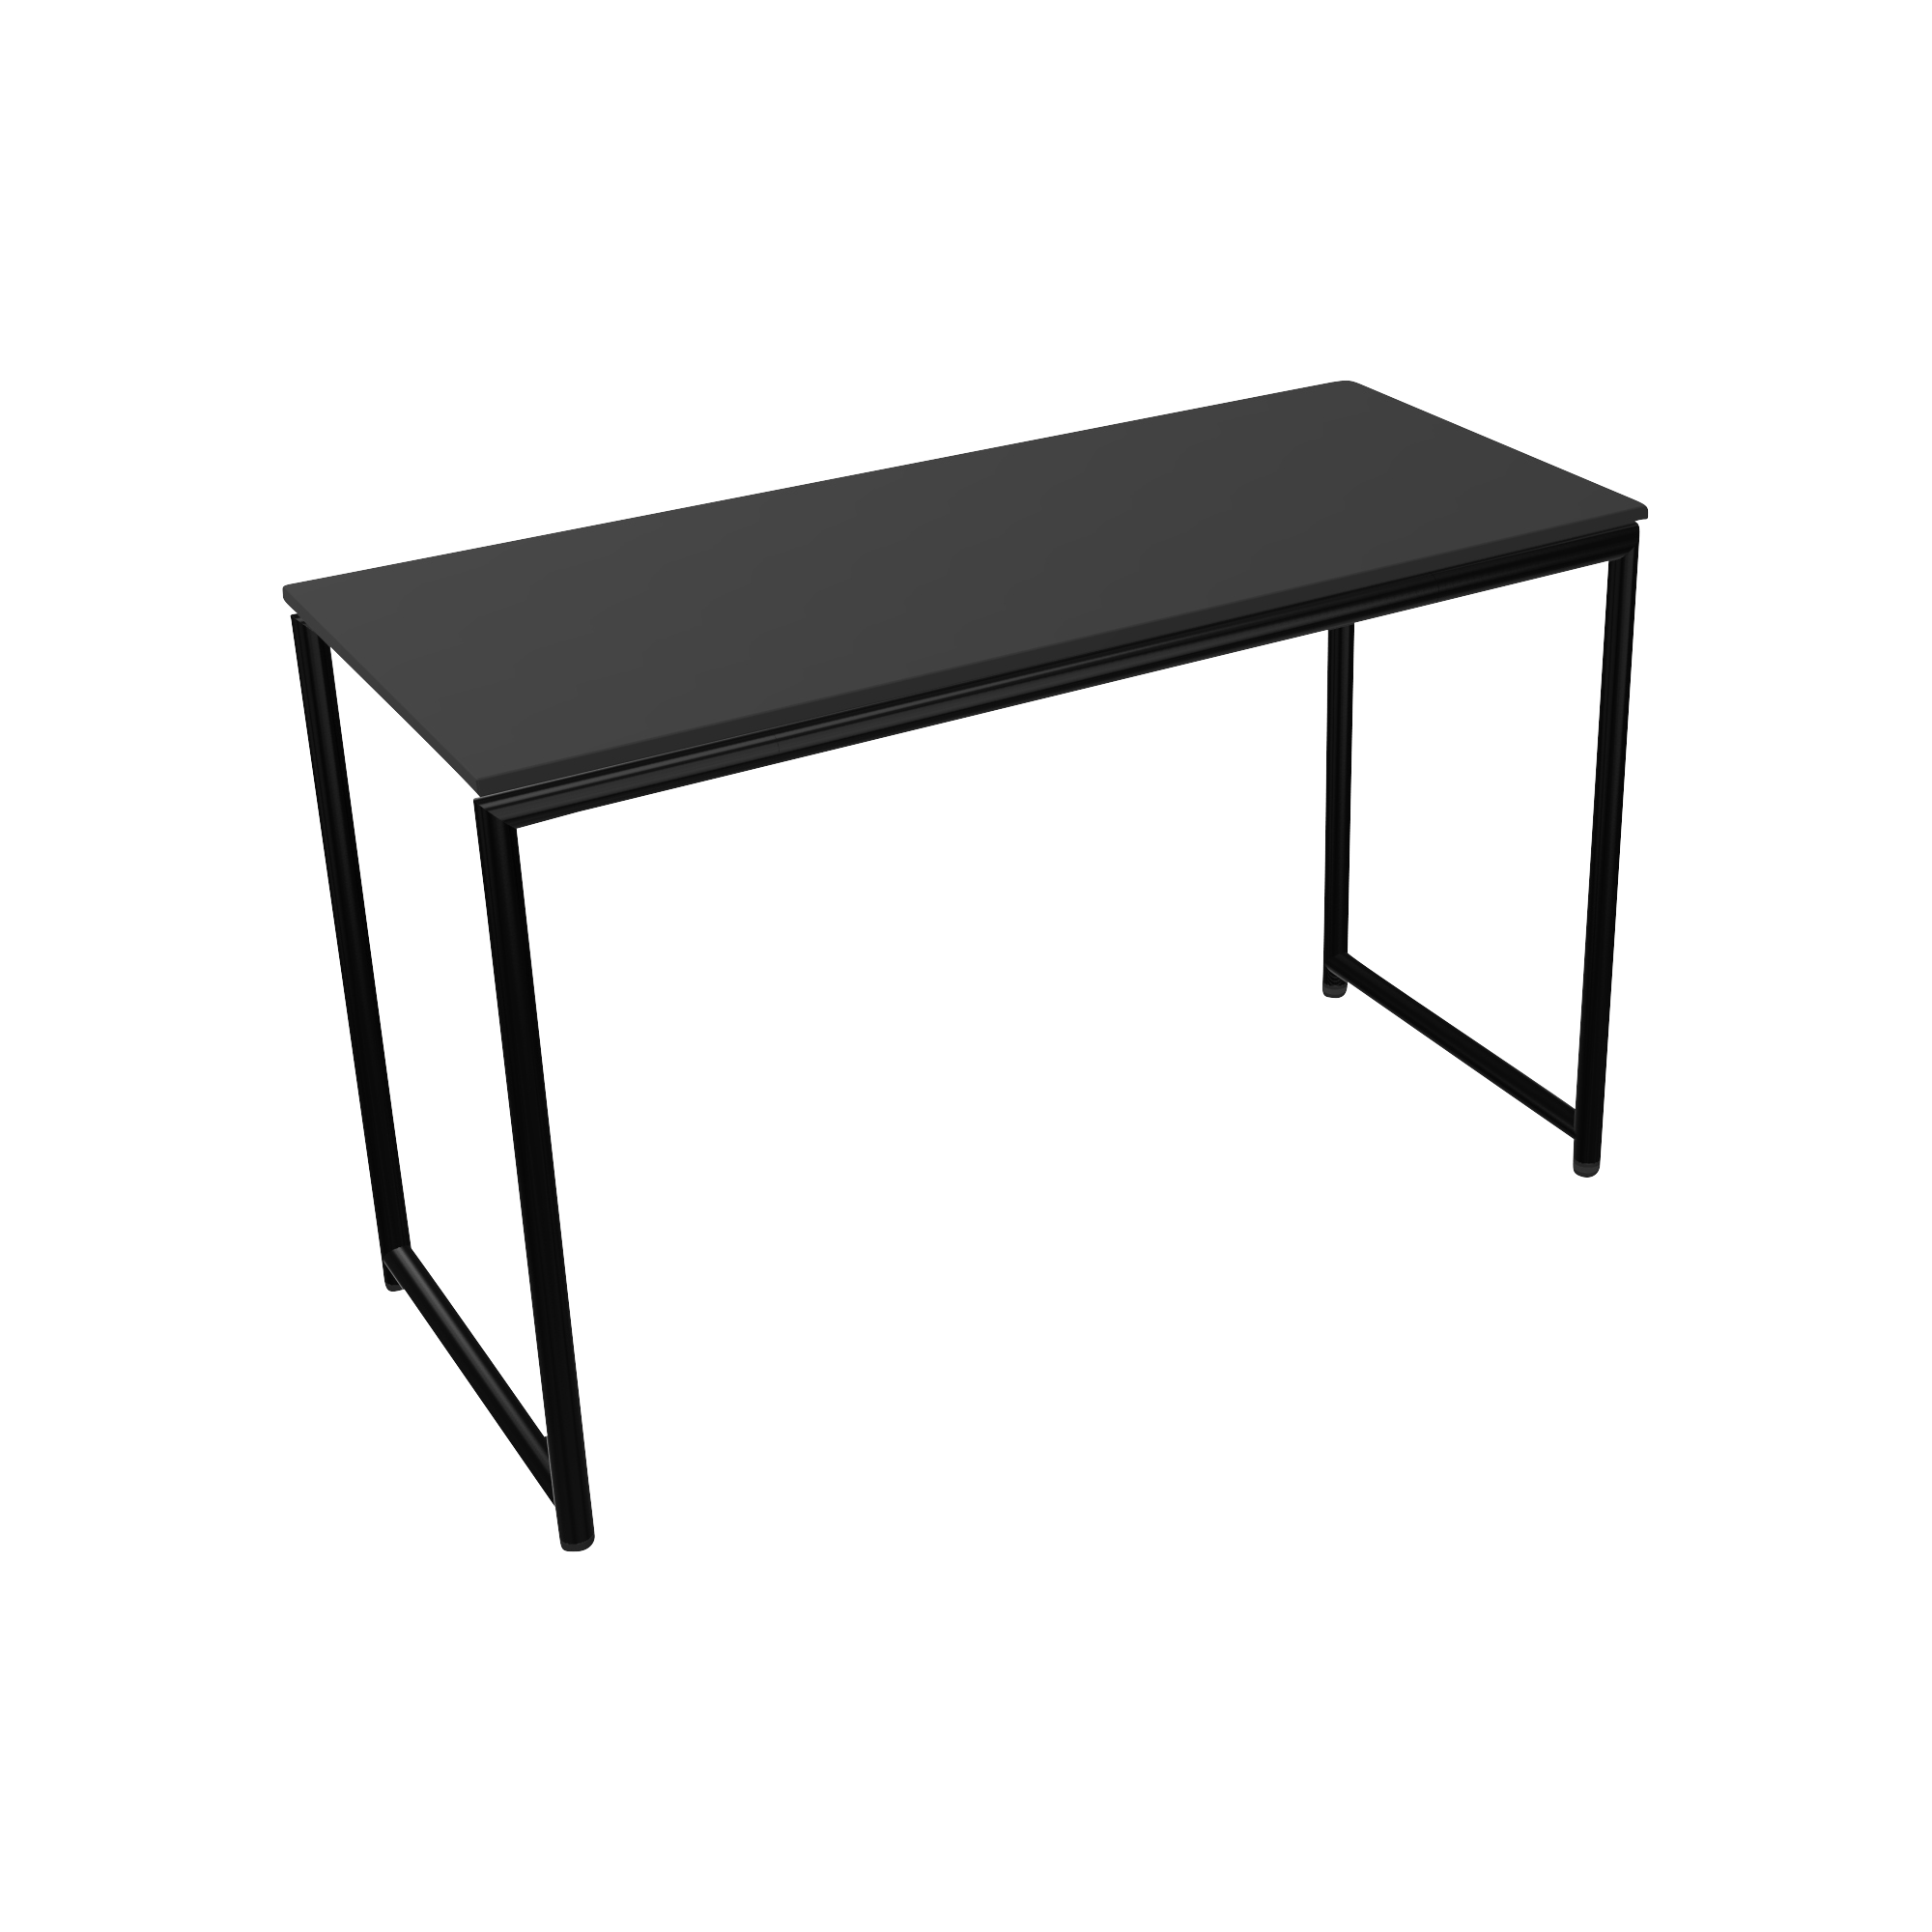 A black desk with a metal frame and two legs